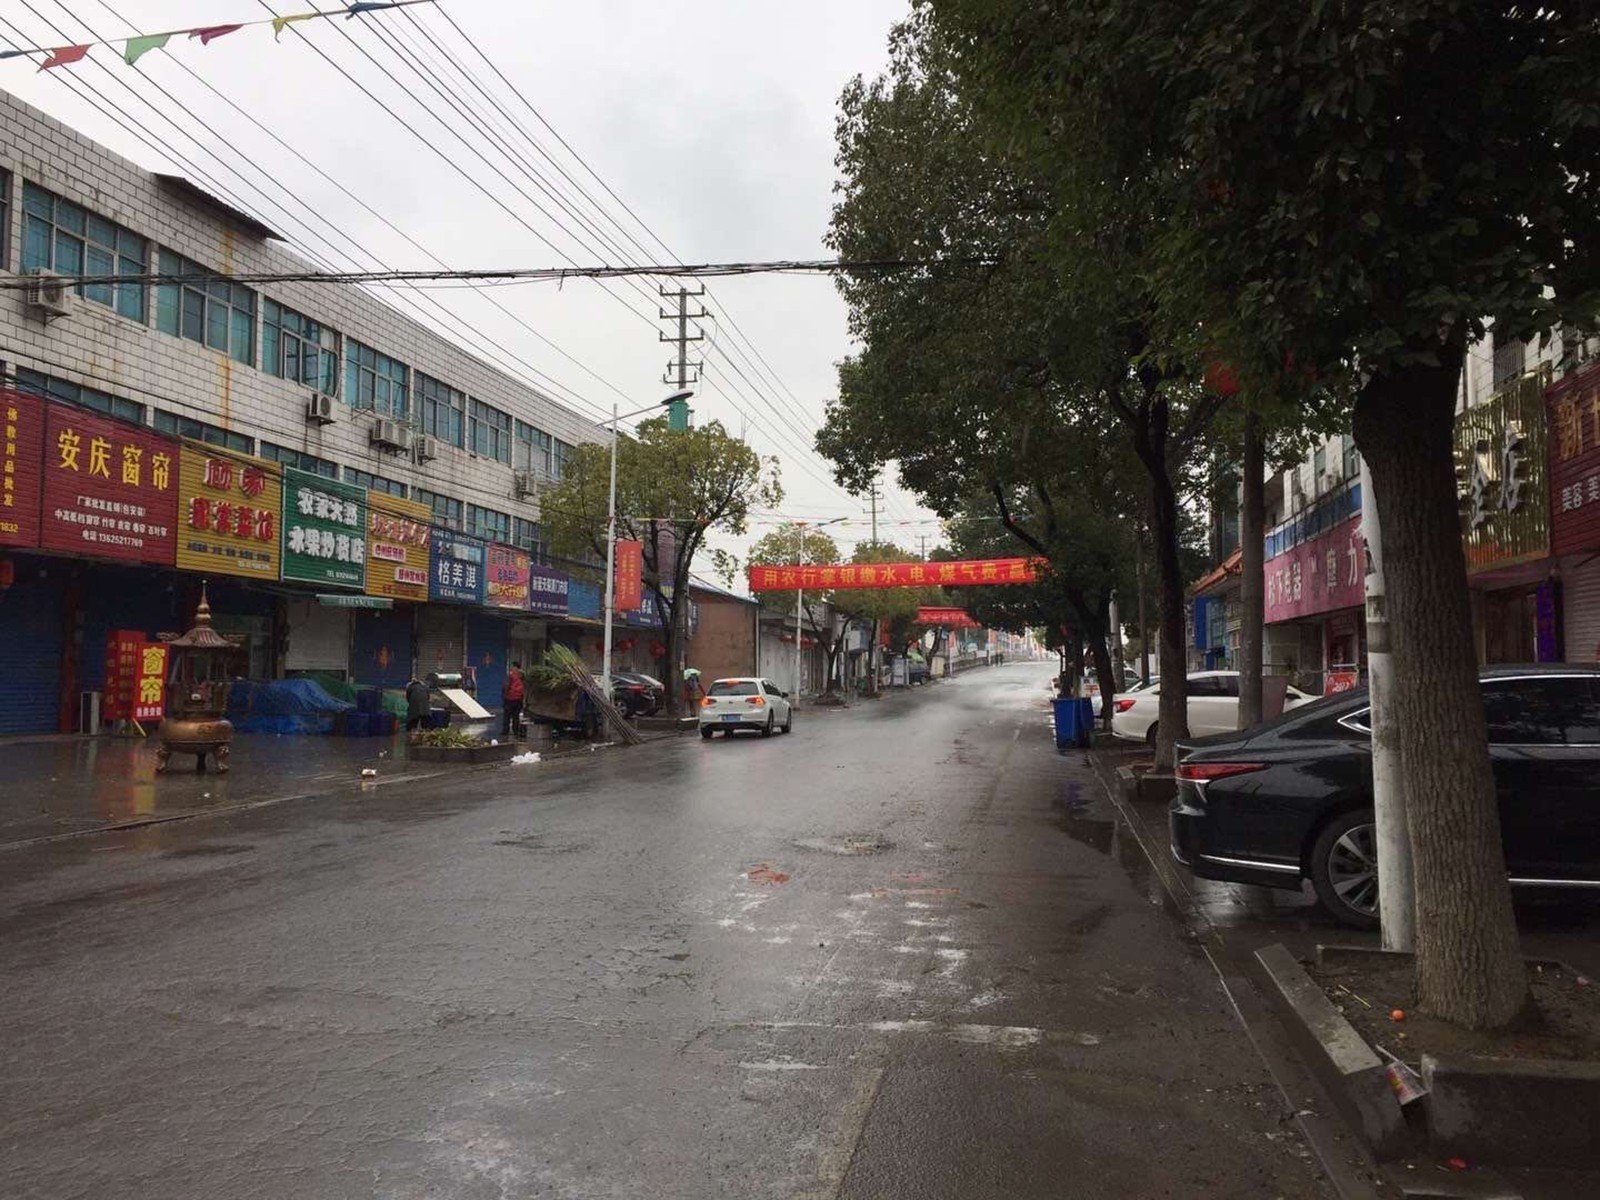 The streets of Dinggou in Jiangsu province are deserted over the festive season. Photo: Weibo